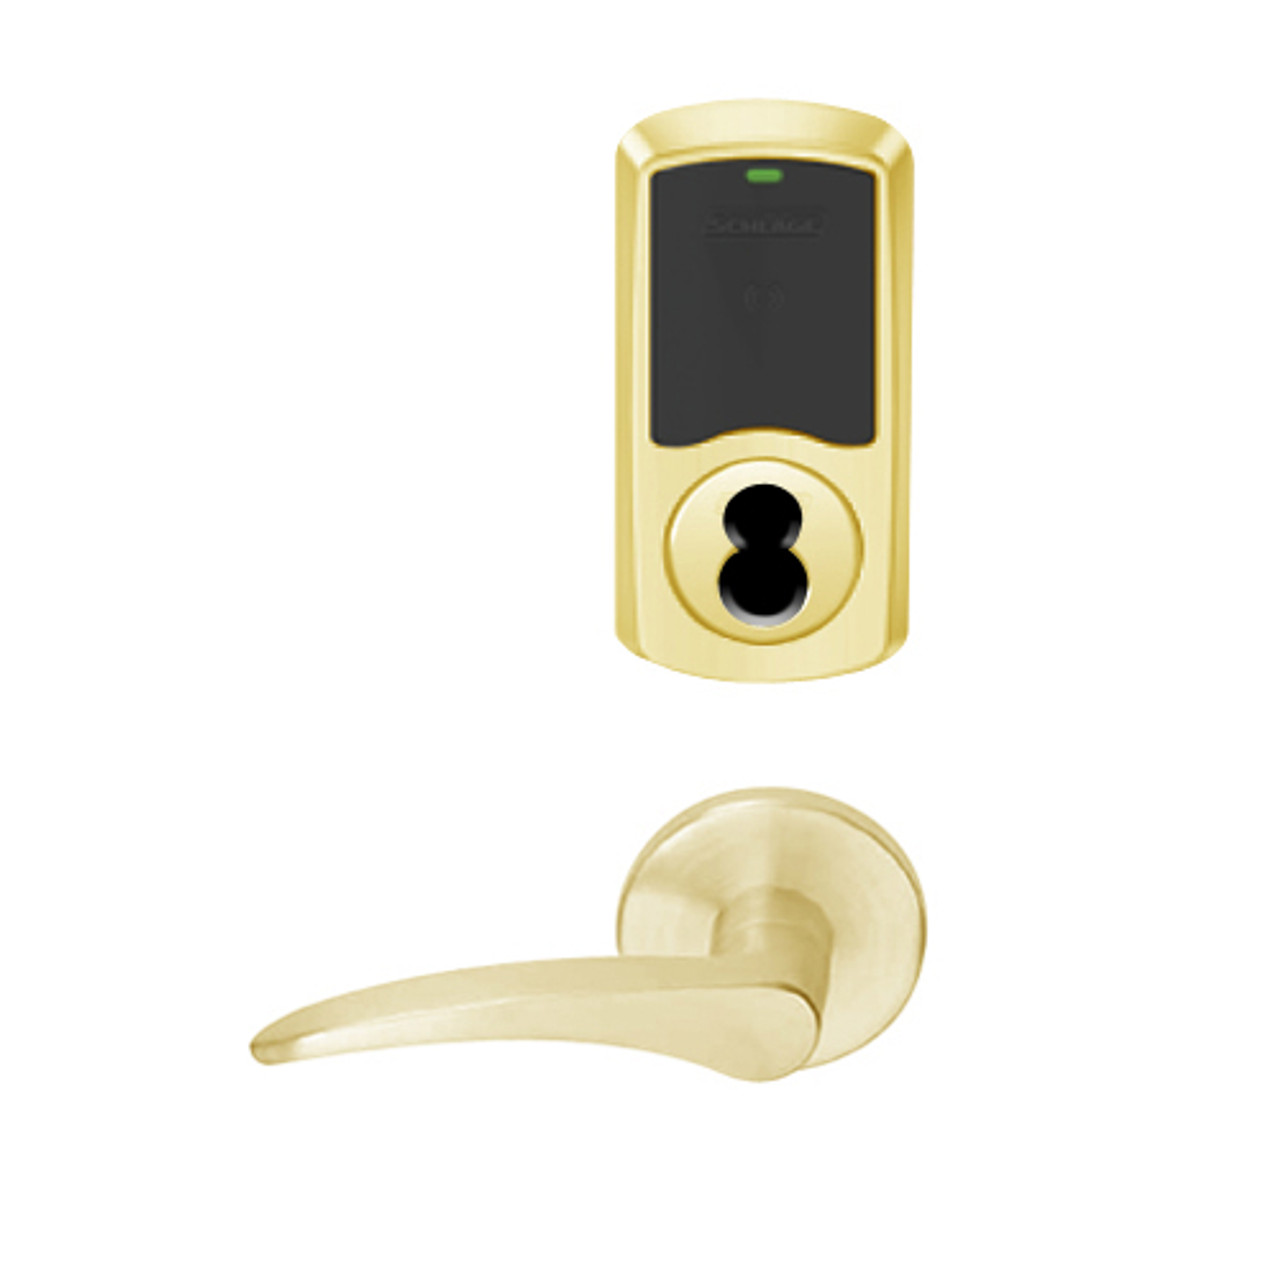 LEMB-GRW-J-12-605-00B-RH Schlage Privacy/Office Wireless Greenwich Mortise Lock with Push Button & LED Indicator and 12 Lever Prepped for FSIC in Bright Brass